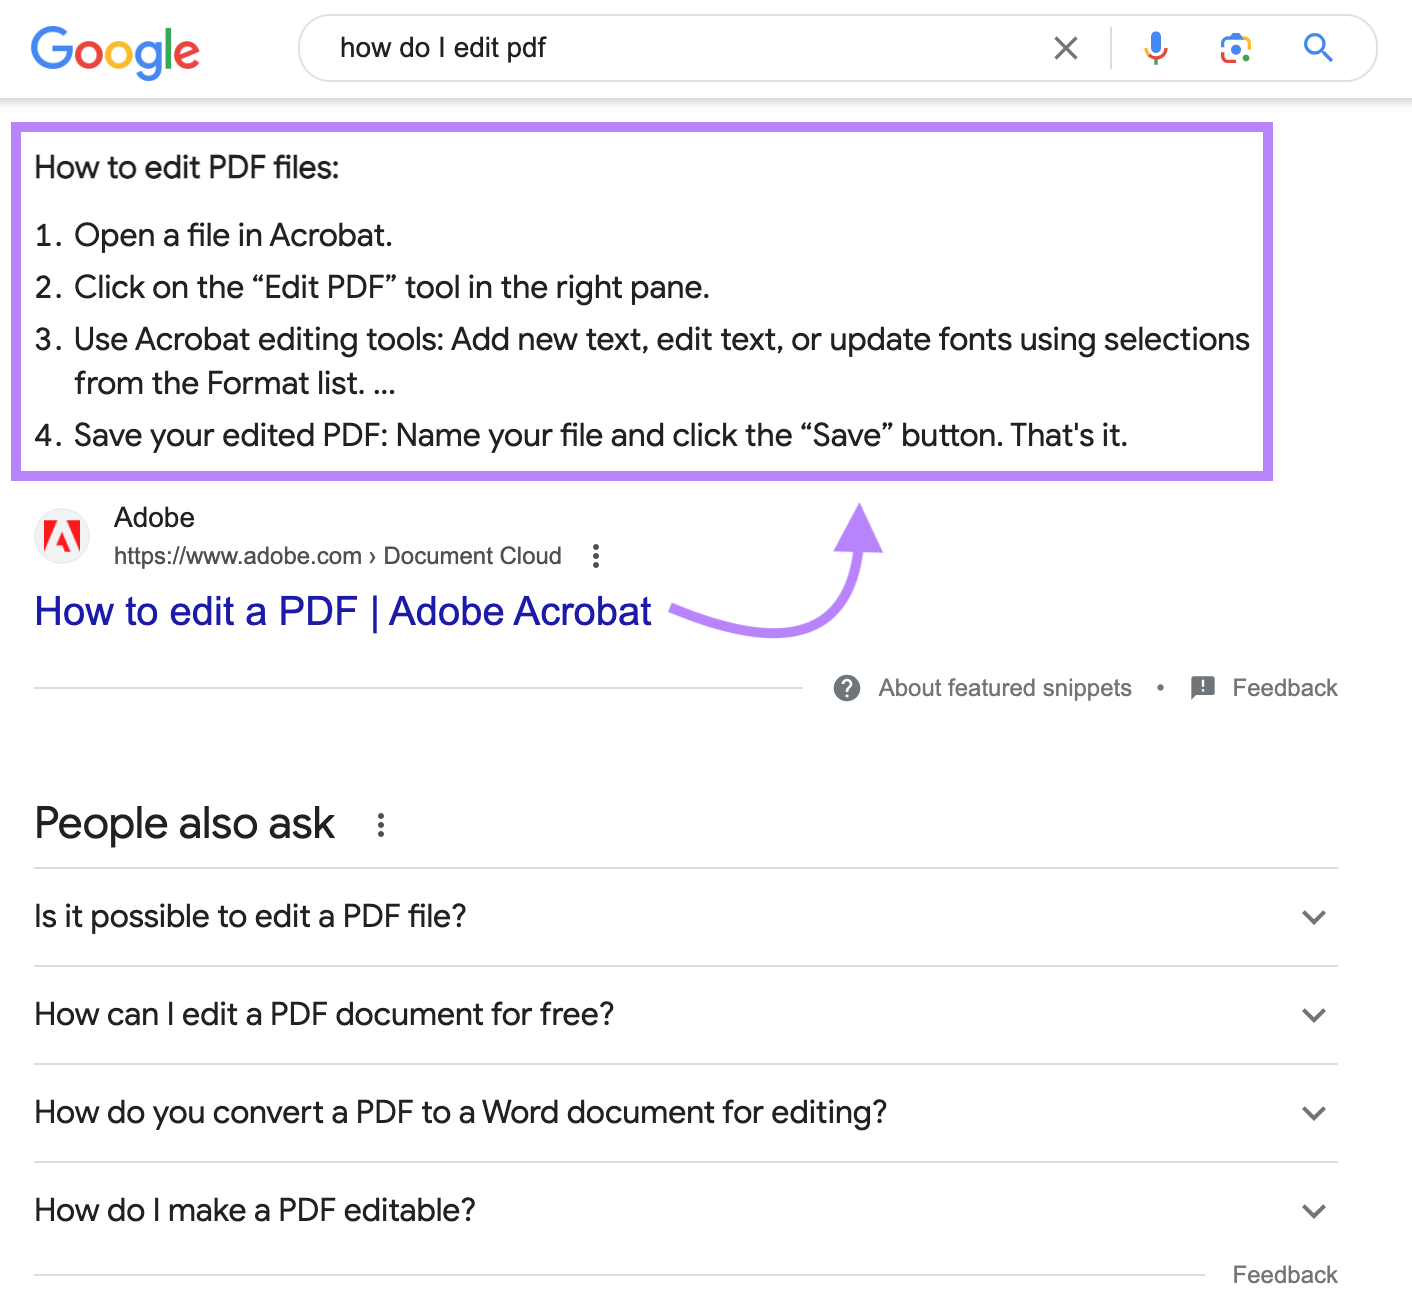 an example of featured snippet from Adobe in Google SERP for "how do i edit pdf"